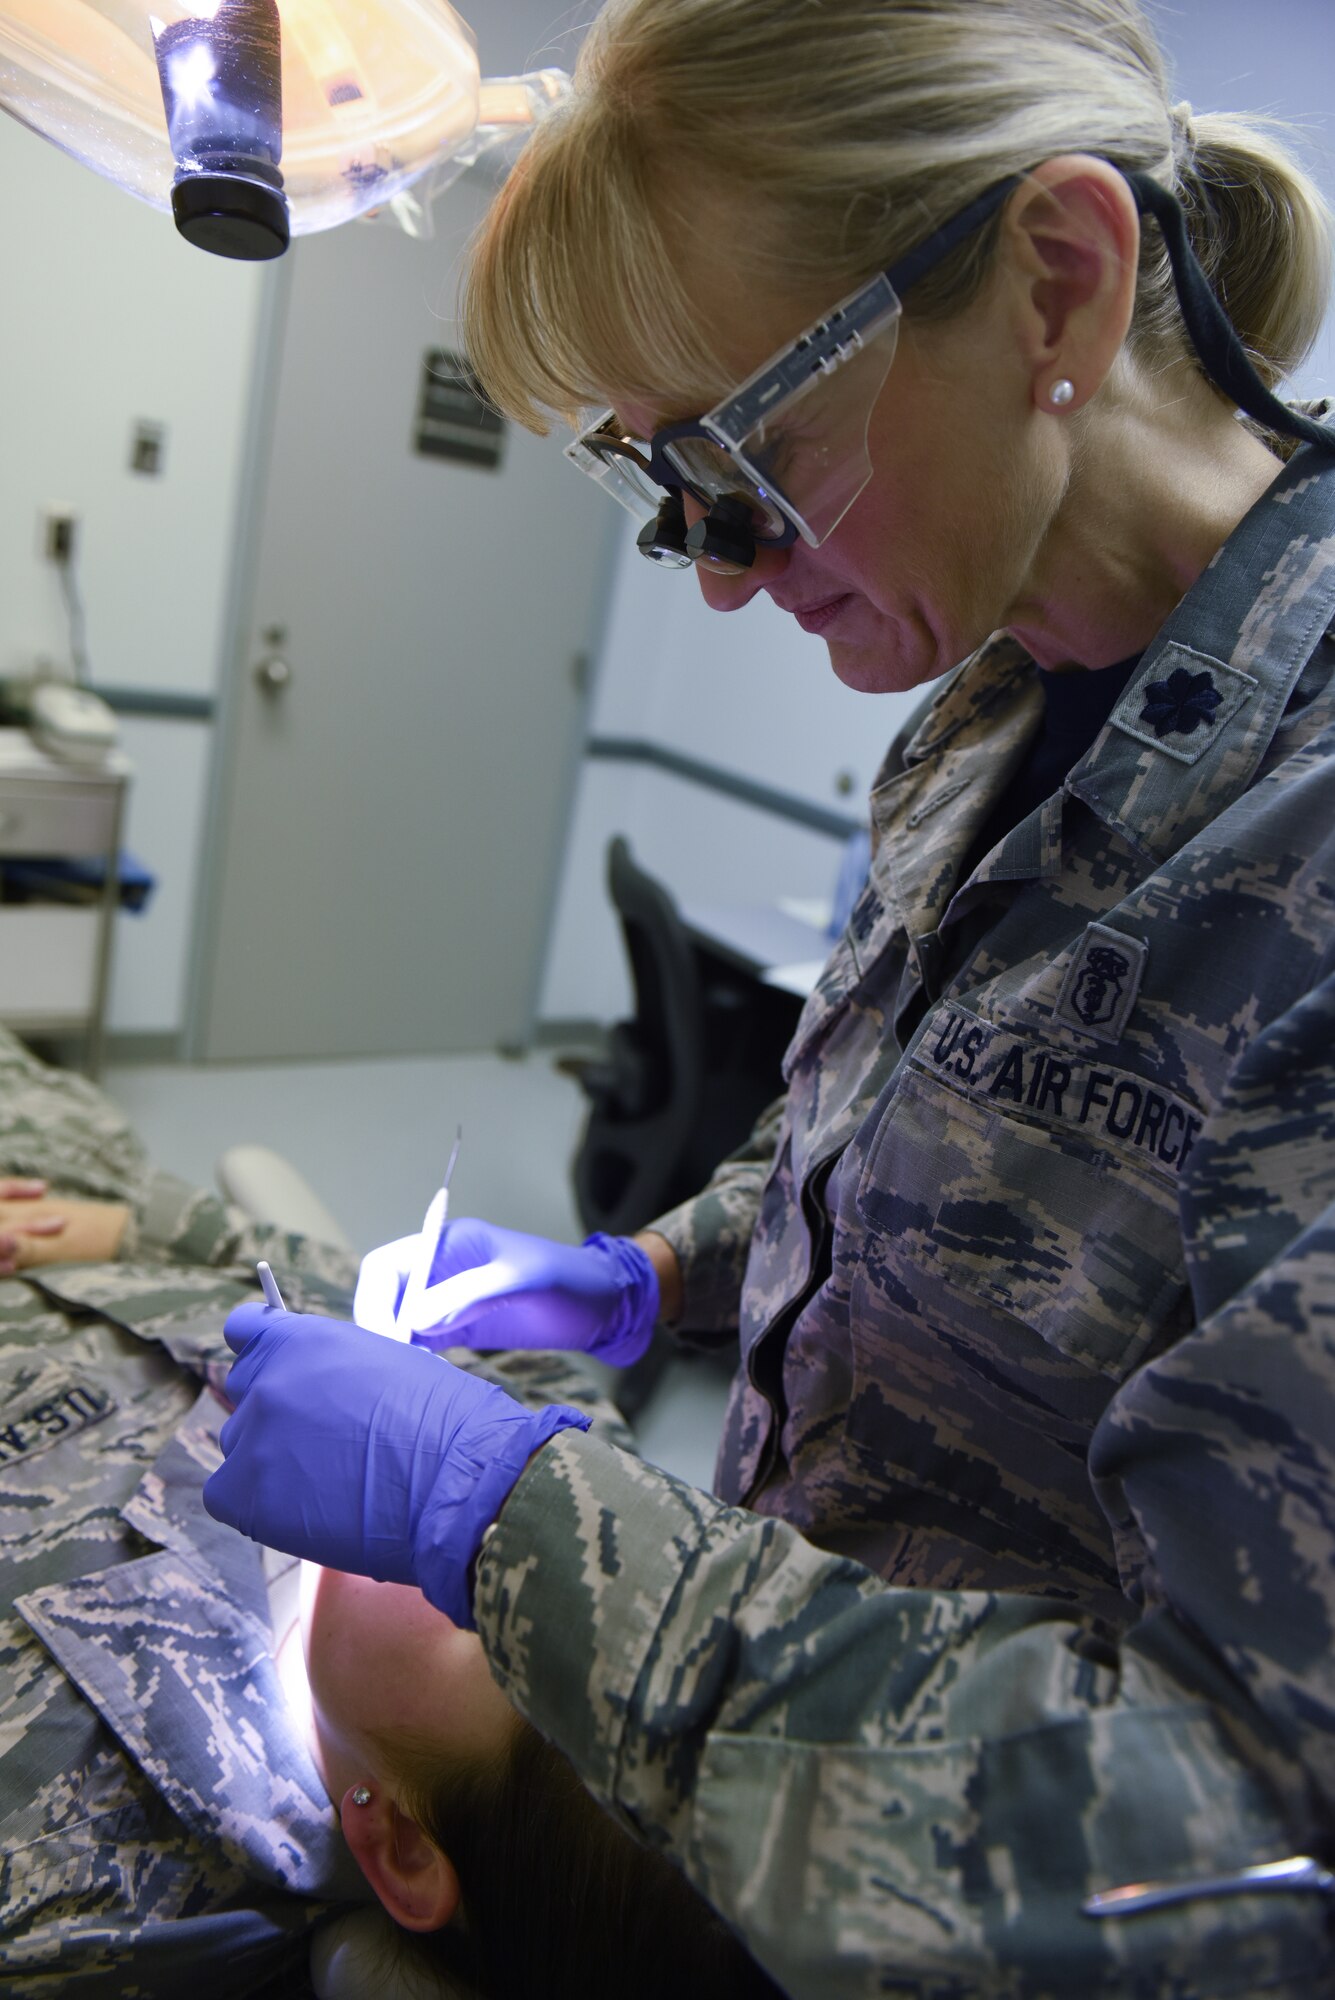 Lt. Col. Nicole Yingling, a dentist with the 193rd Special Operations Medical Group, Middletown, Pennsylvania, performs a routine checkup on an Airman Sept. 22, 2018. Yingling served 11 years as an active duty dentist and after a 12-year break-in-service, enlisted into the 193rd SOMDG. (U.S. Air National Guard photo by Senior Airman Julia Sorber/Released)